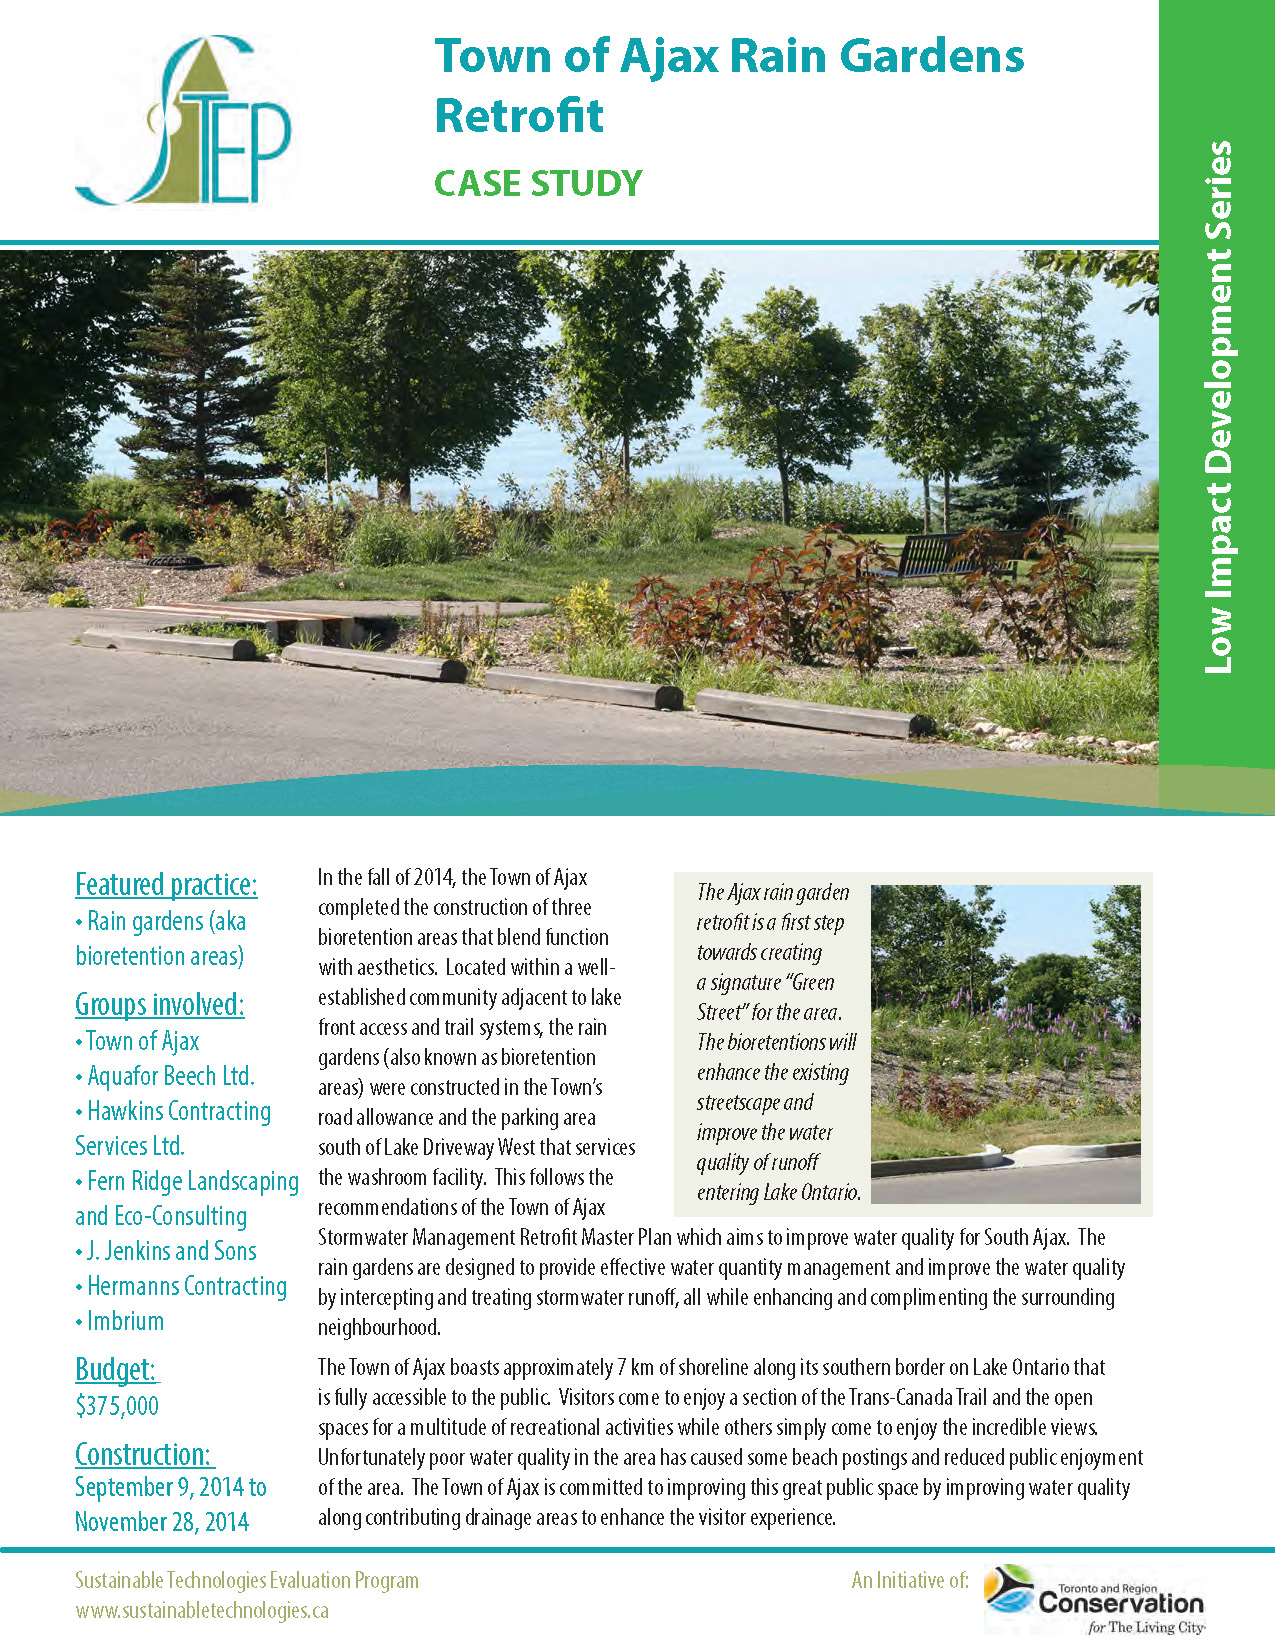 Cover page of the Town of Ajax Rain Gardens Retrofit case study